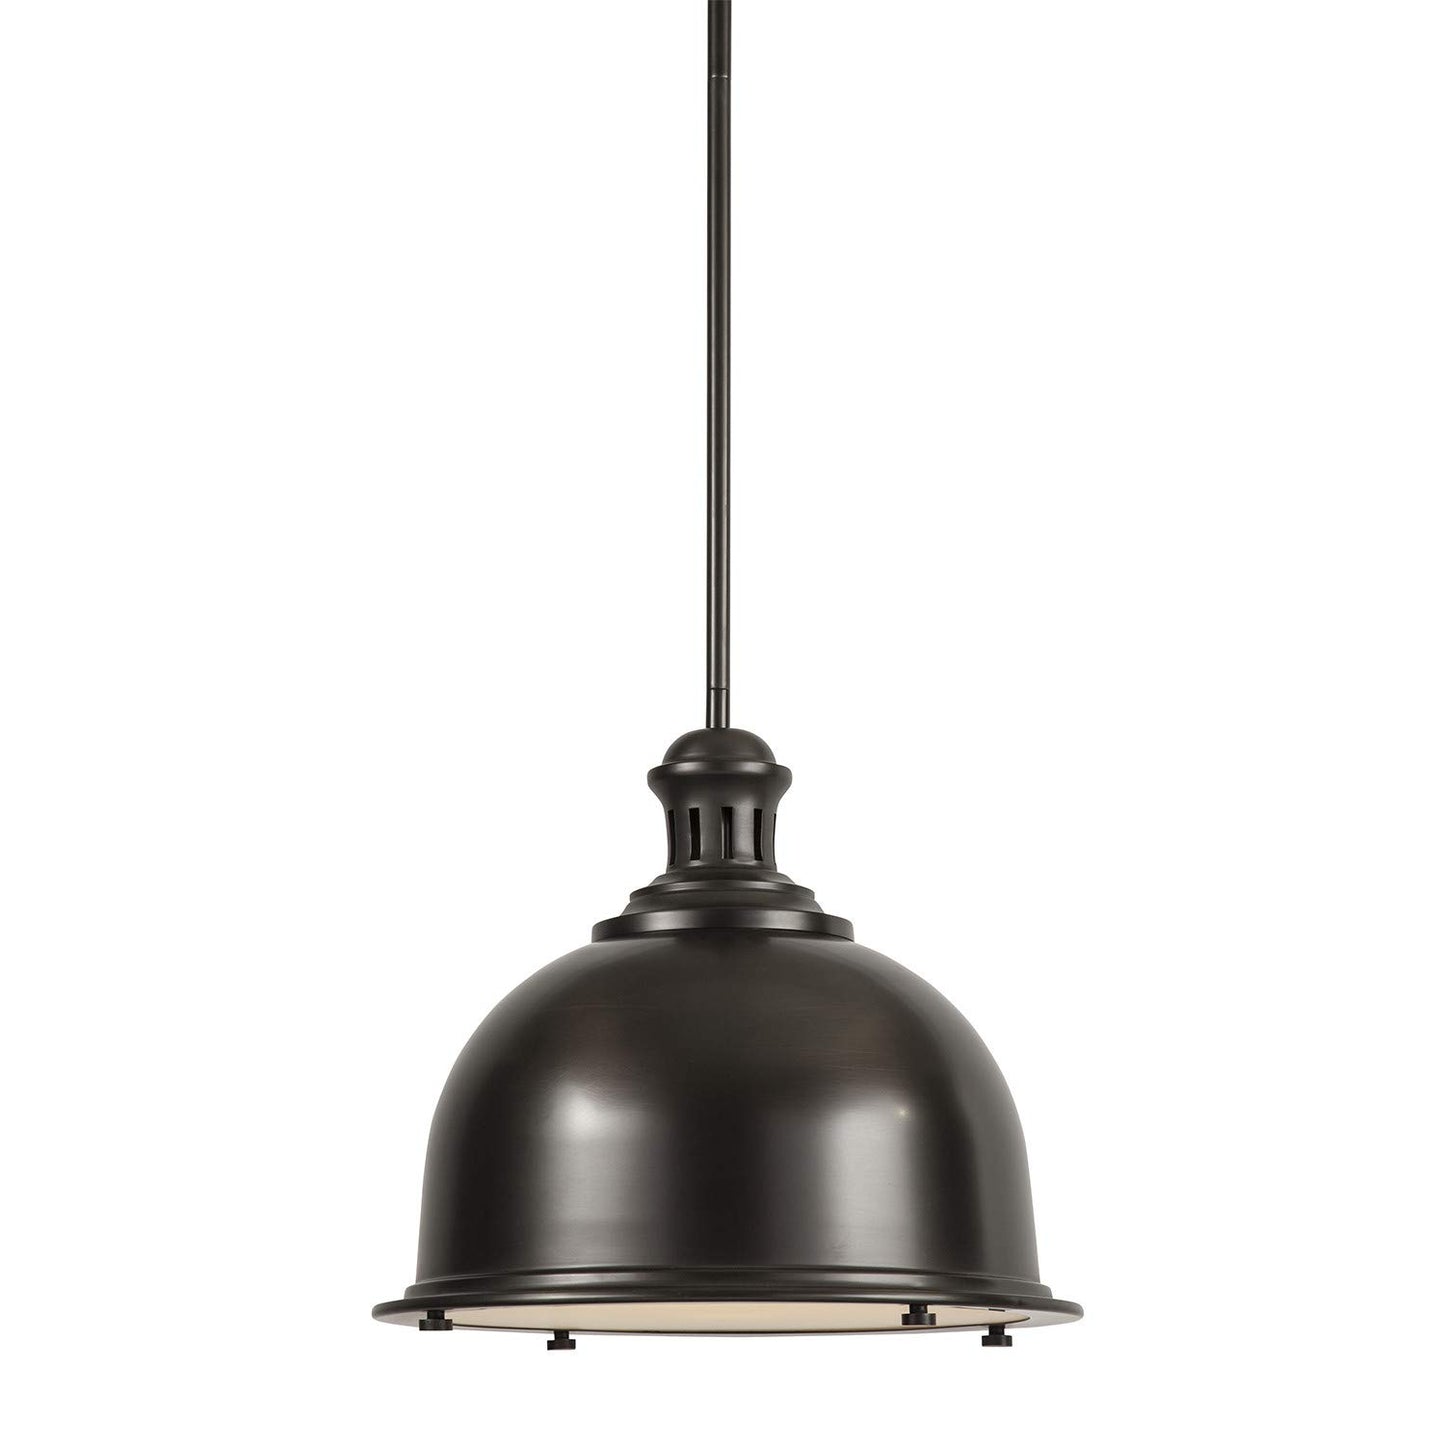 Park Harbor PHPL5081BN Park Harbor PHPL5081 Chisum 13" Wide Single Light Single Pendant with Industrial Style Shade